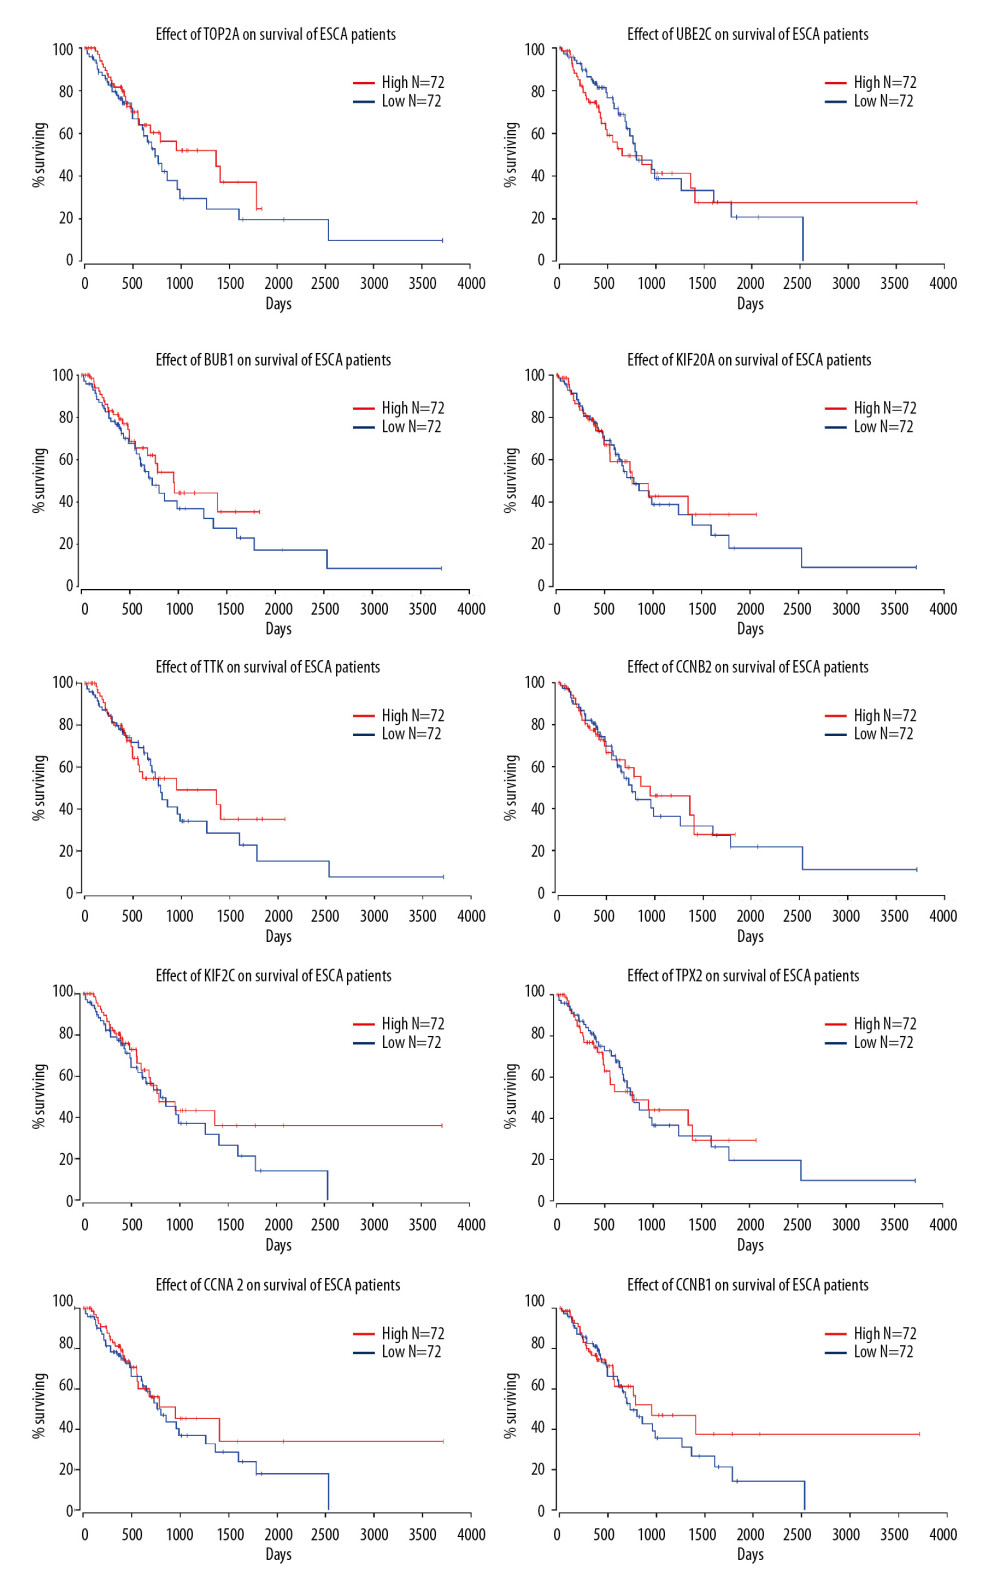 Effects of the top 10 hub genes on prognosis of ESCA patients, as calculated by OncoLnc. All of the hub genes improved late survival time of ESCA patients (x>2000), while few exhibited any association with early survival time.